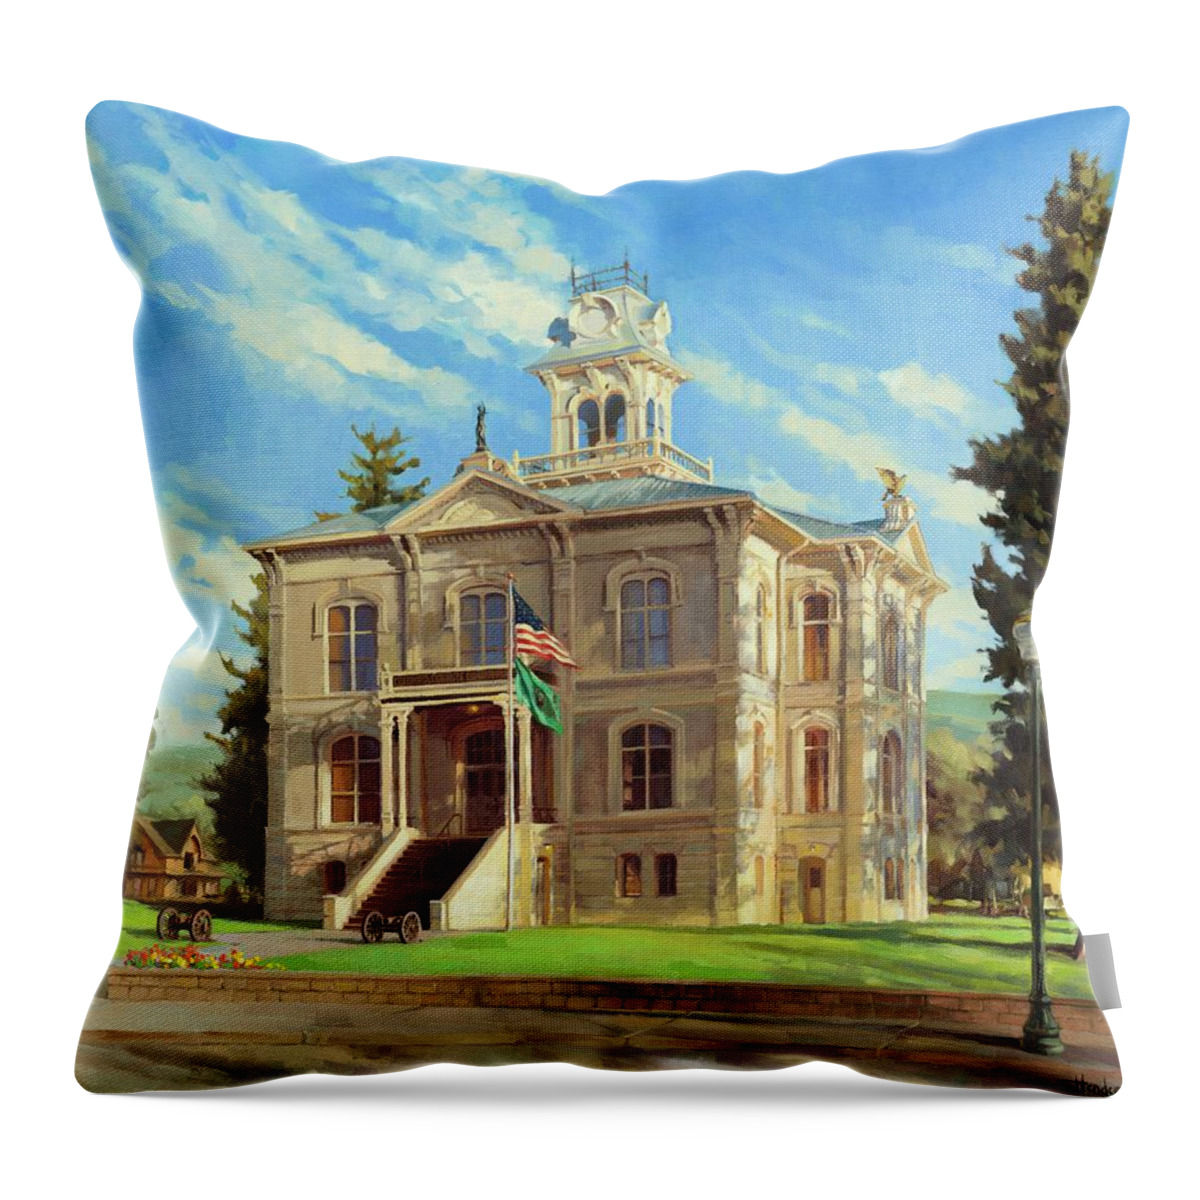 Courthouse Throw Pillow featuring the painting Columbia County Courthouse by Steve Henderson